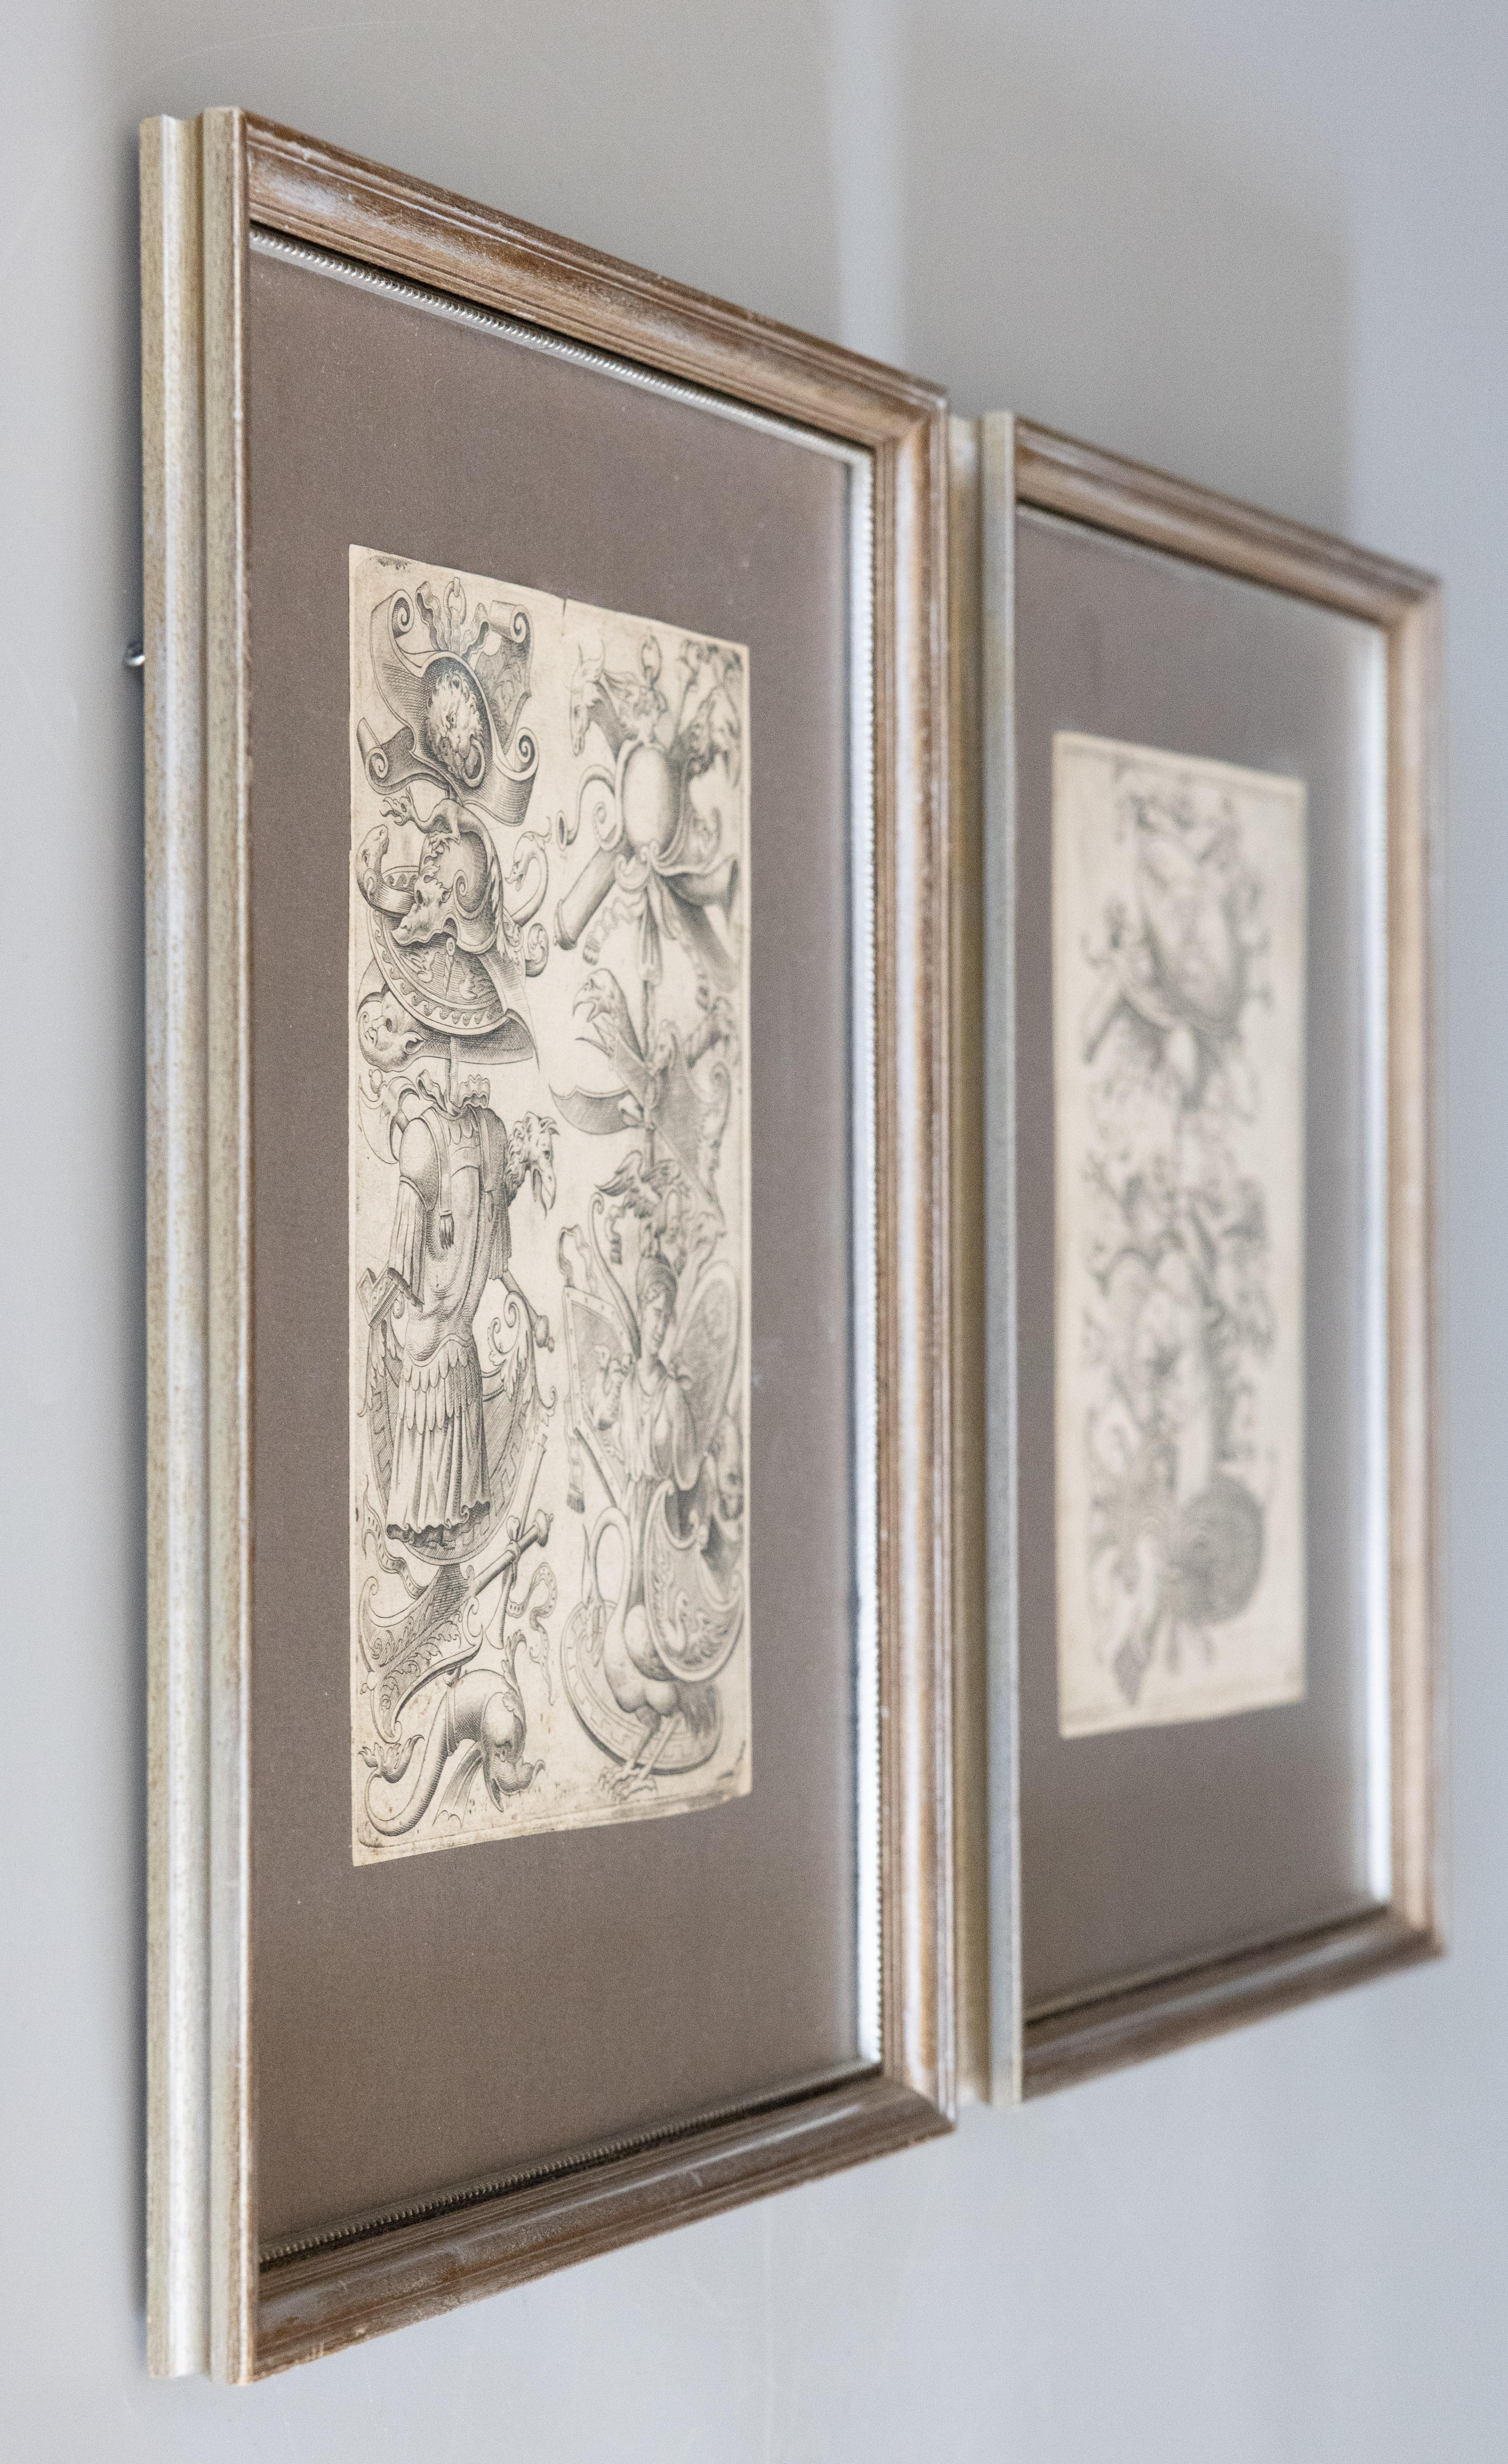 Set of 2 Framed Antique Italian Neoclassical 1553 Engravings by Antonio Lafreri For Sale 2